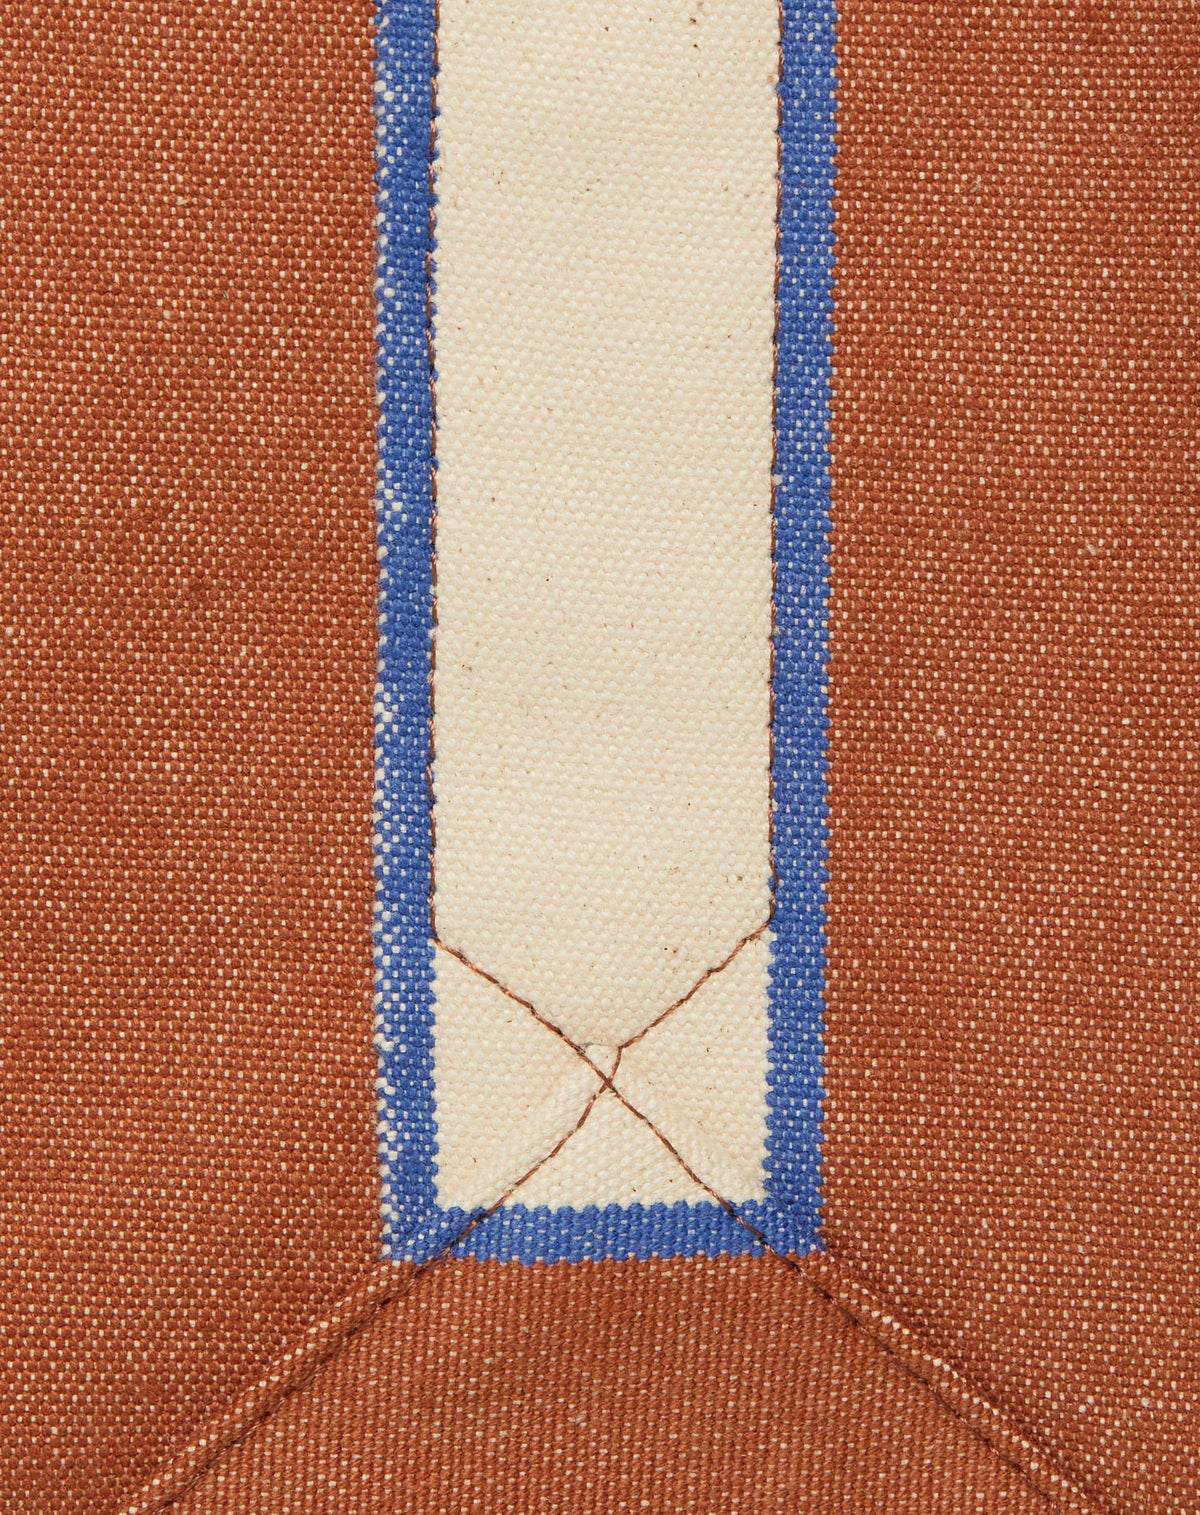 Close-up image of tan canvas with contrasting natural ecru stripe and stitching detail.